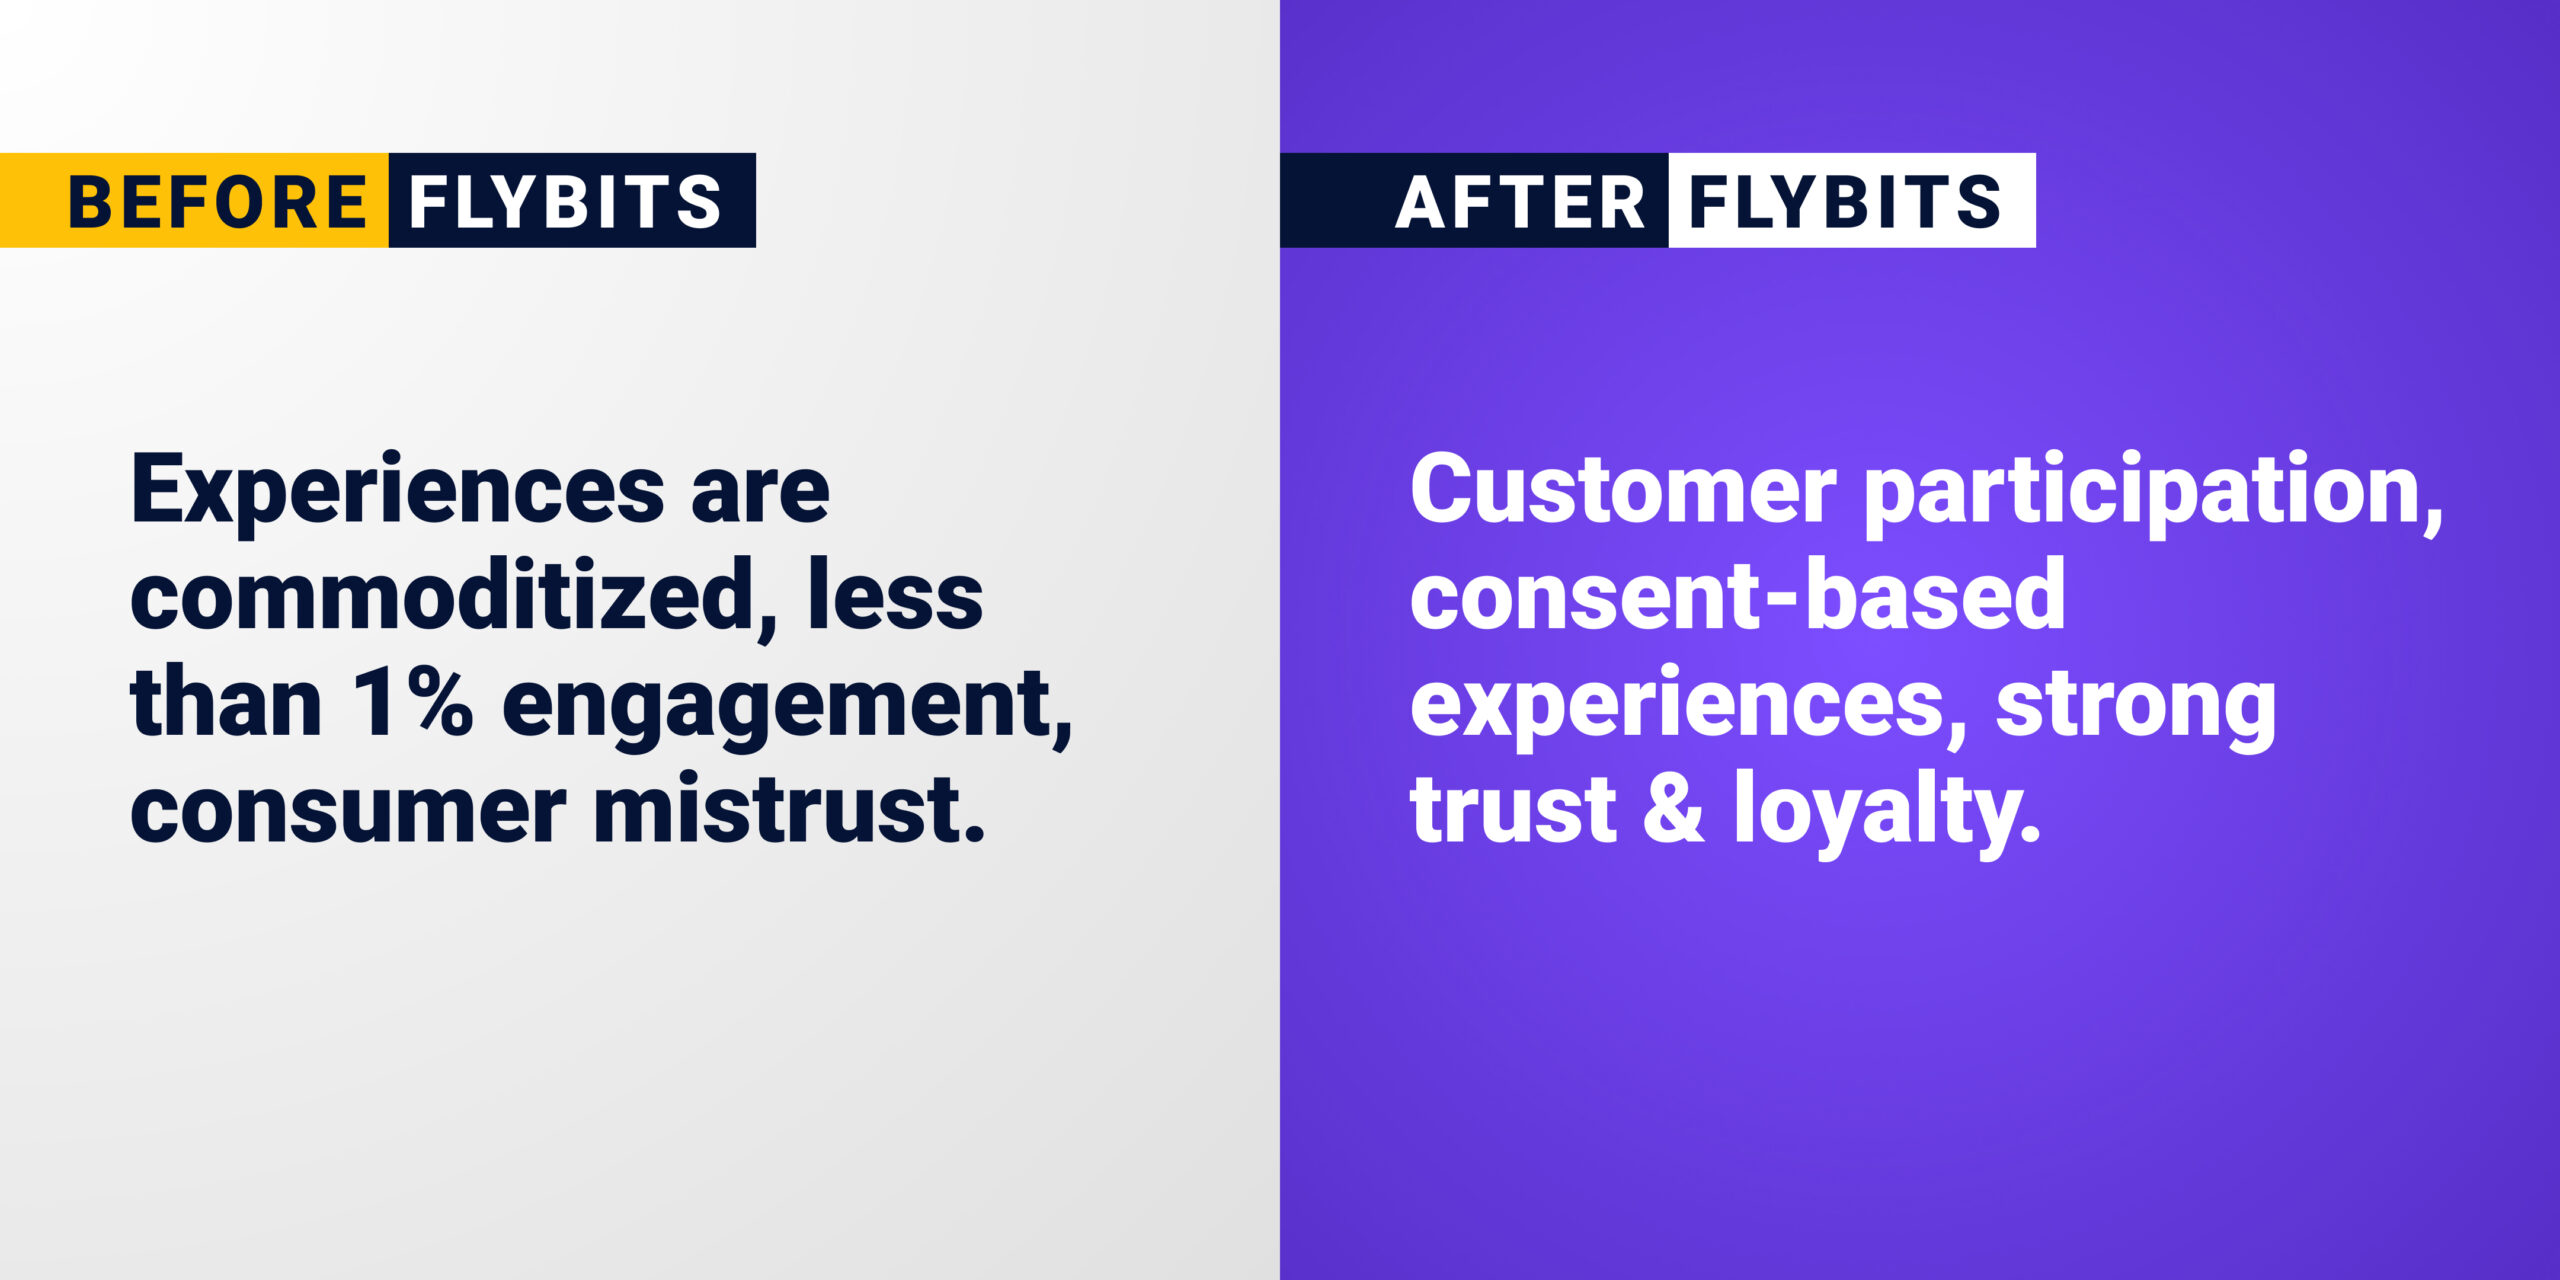 Before Flybits: Experiences are commoditized, less than 1% engagement, consumer mistrust. After Flybits: Customer participation, consent-based experiences, strong trust & loyalty.